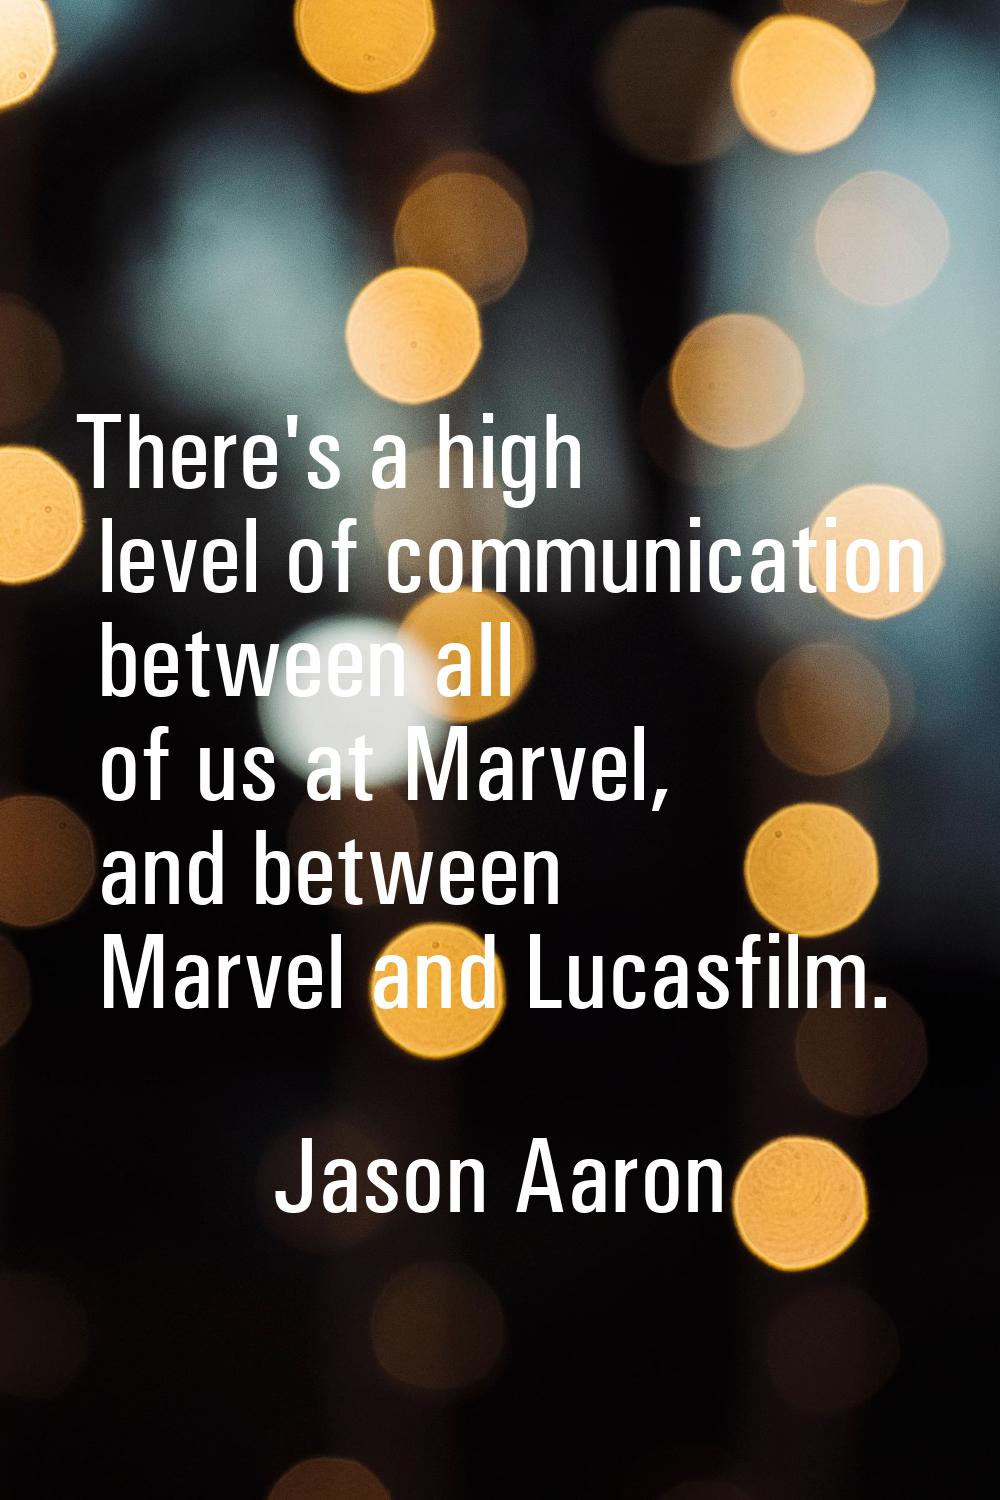 There's a high level of communication between all of us at Marvel, and between Marvel and Lucasfilm